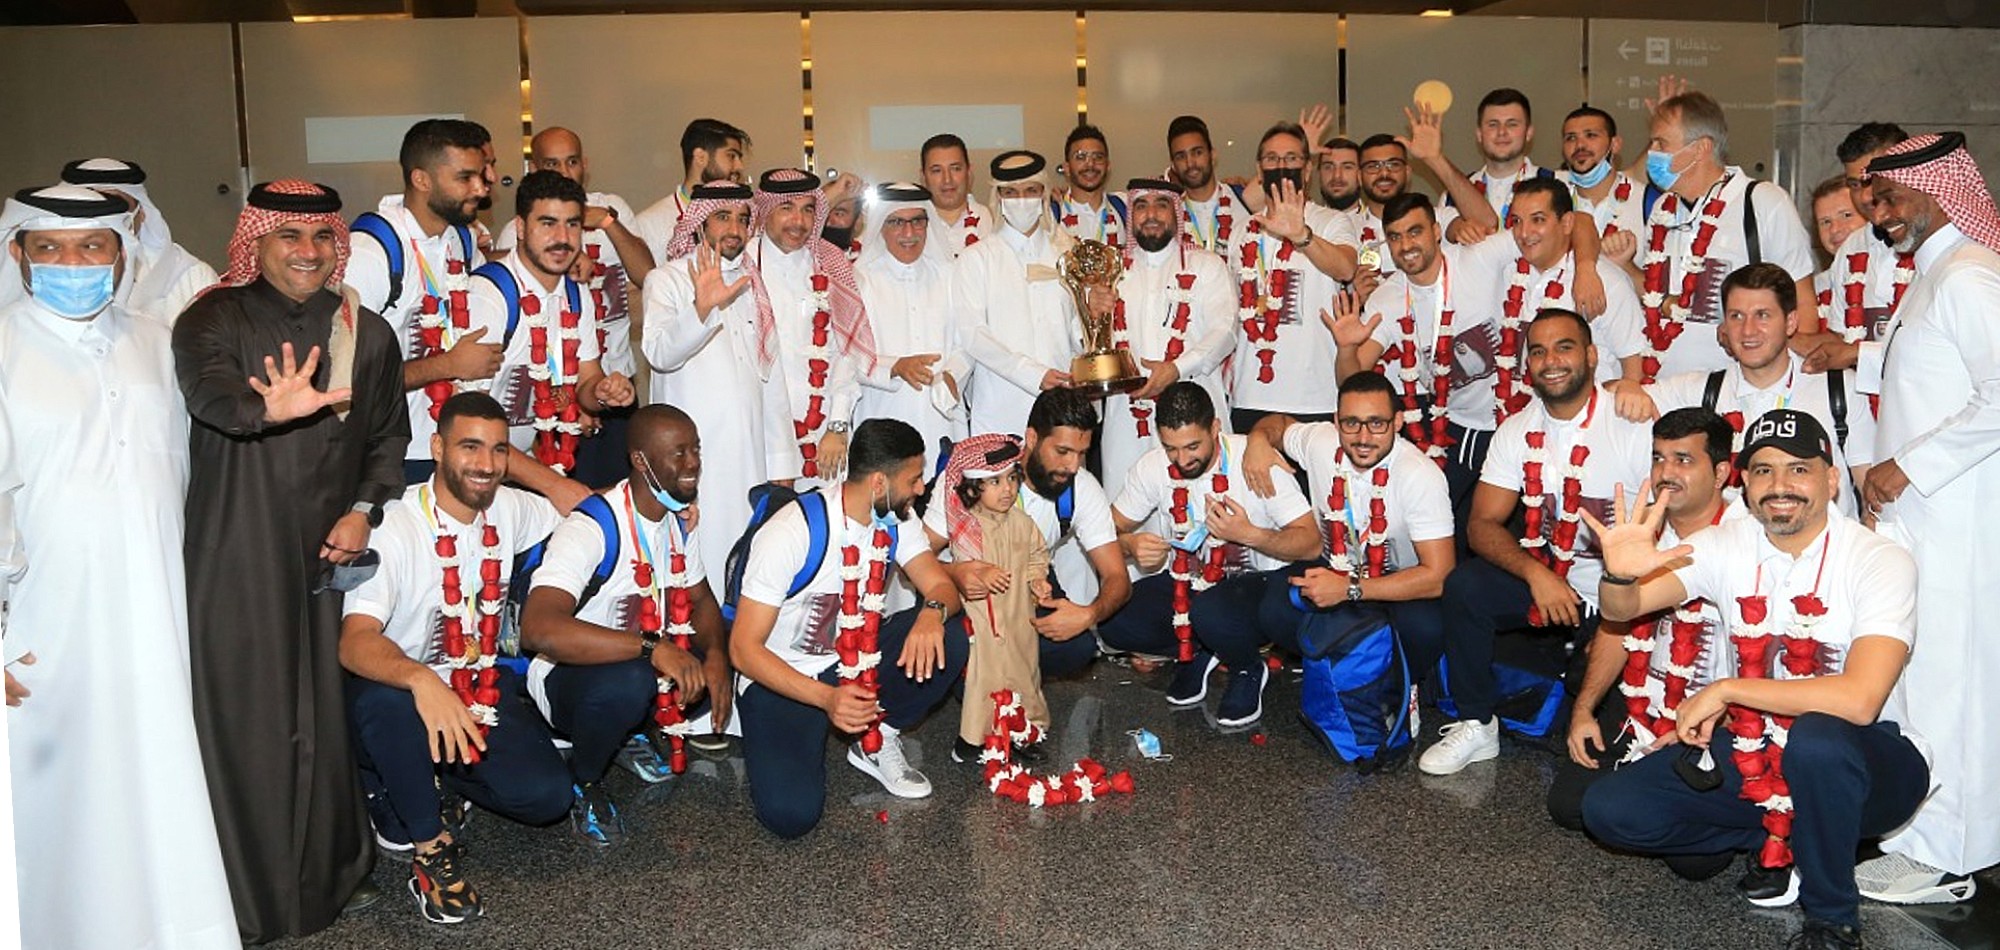 Triumphant Qatar team returns home to heroes’ welcome